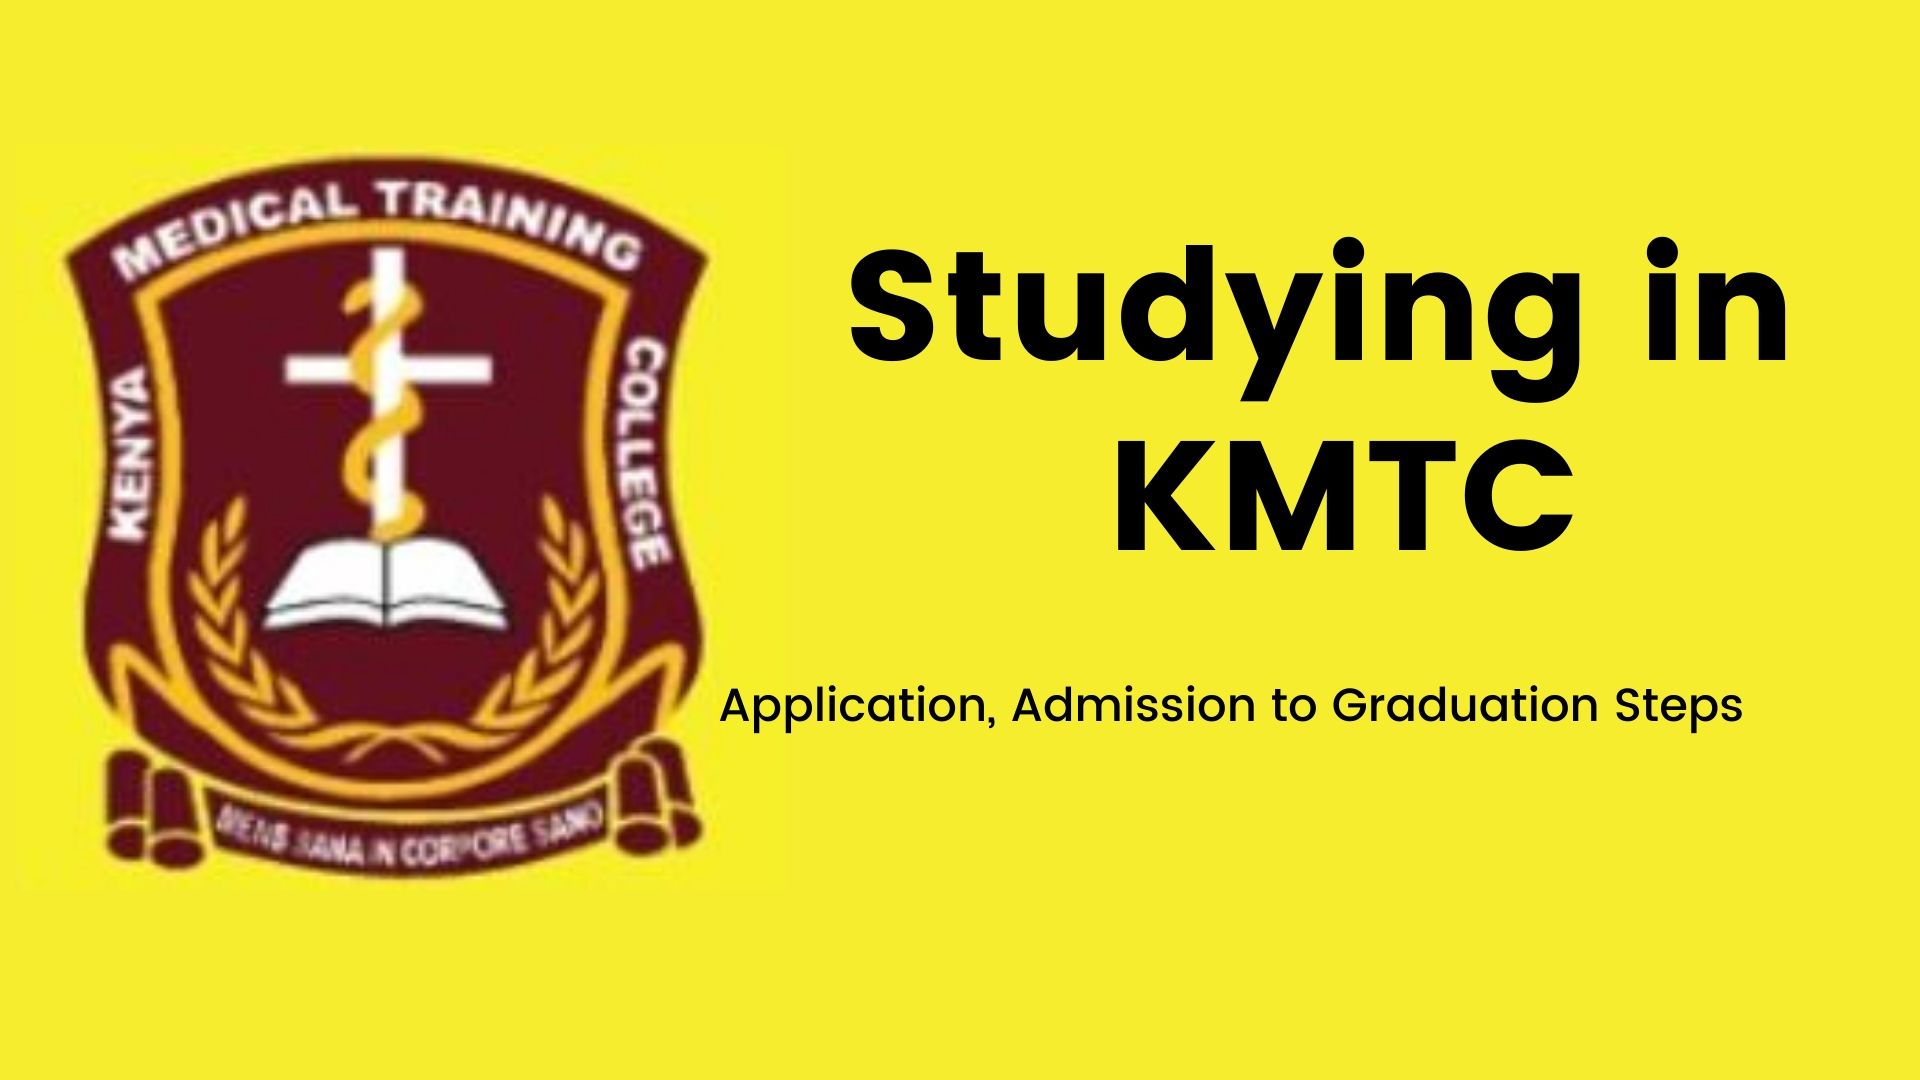 Studying in KMTC tutorials, from application, admission, placement to graduation